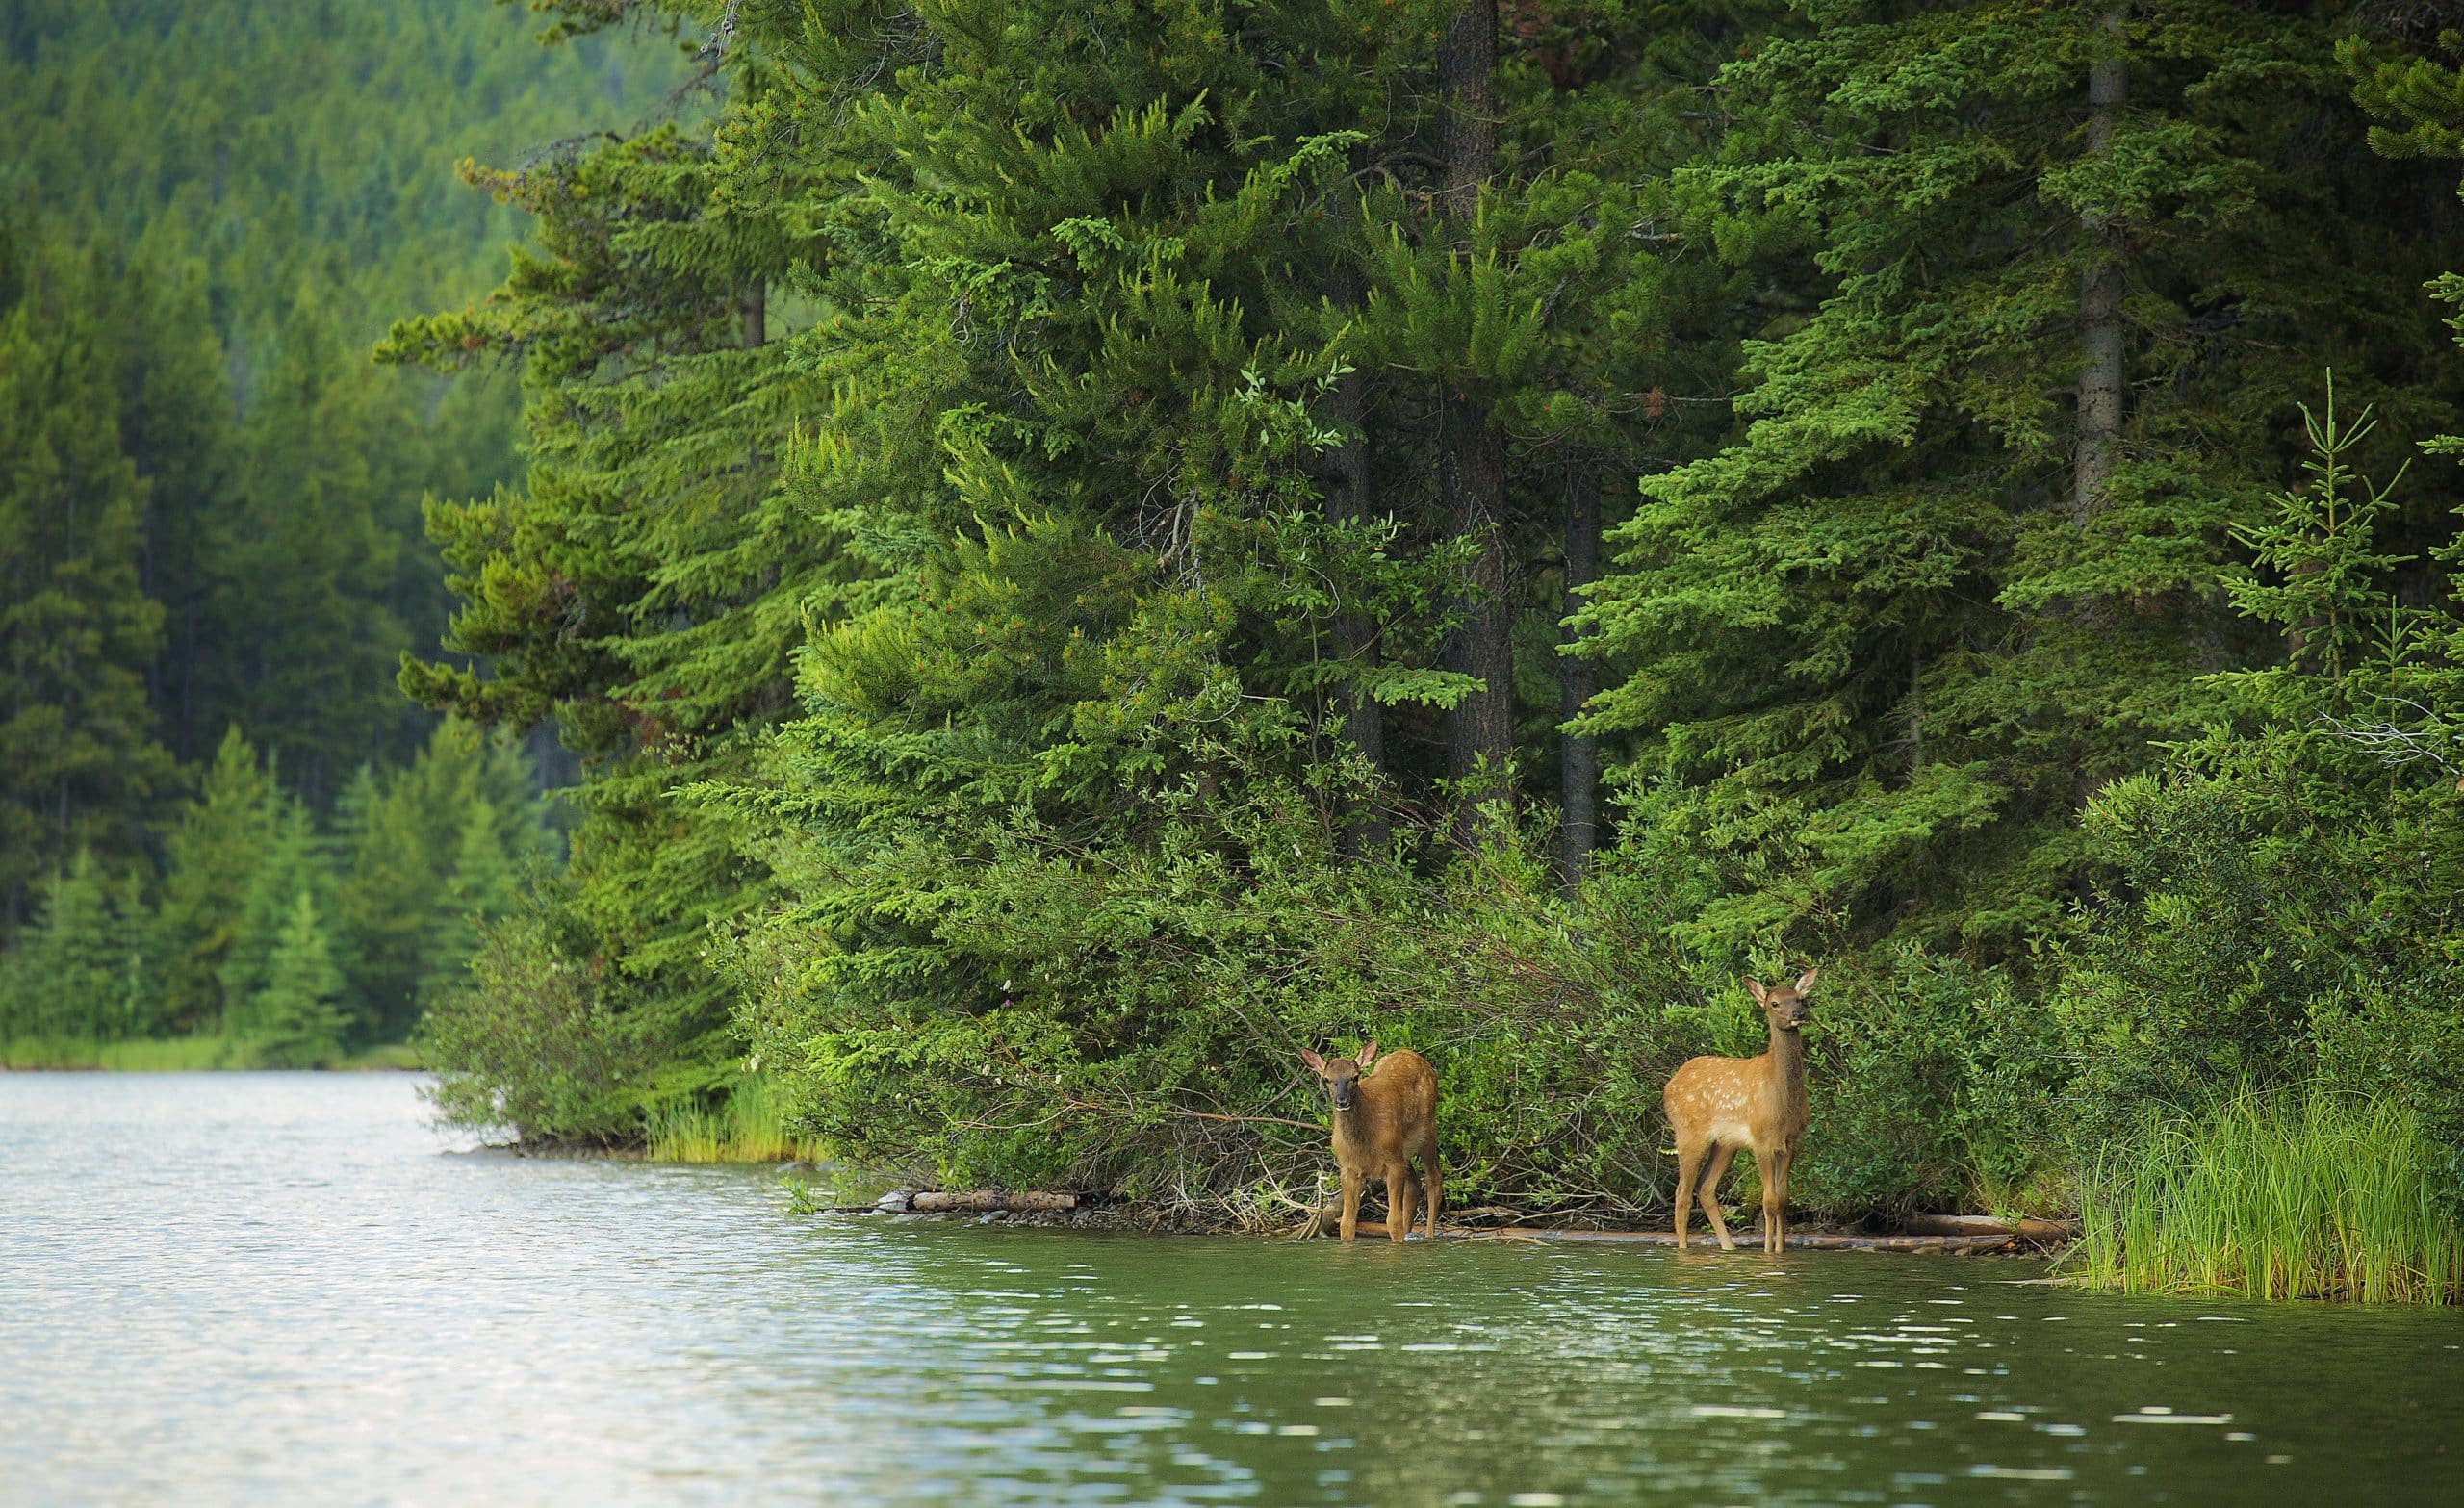 Two deers stand along a river bank